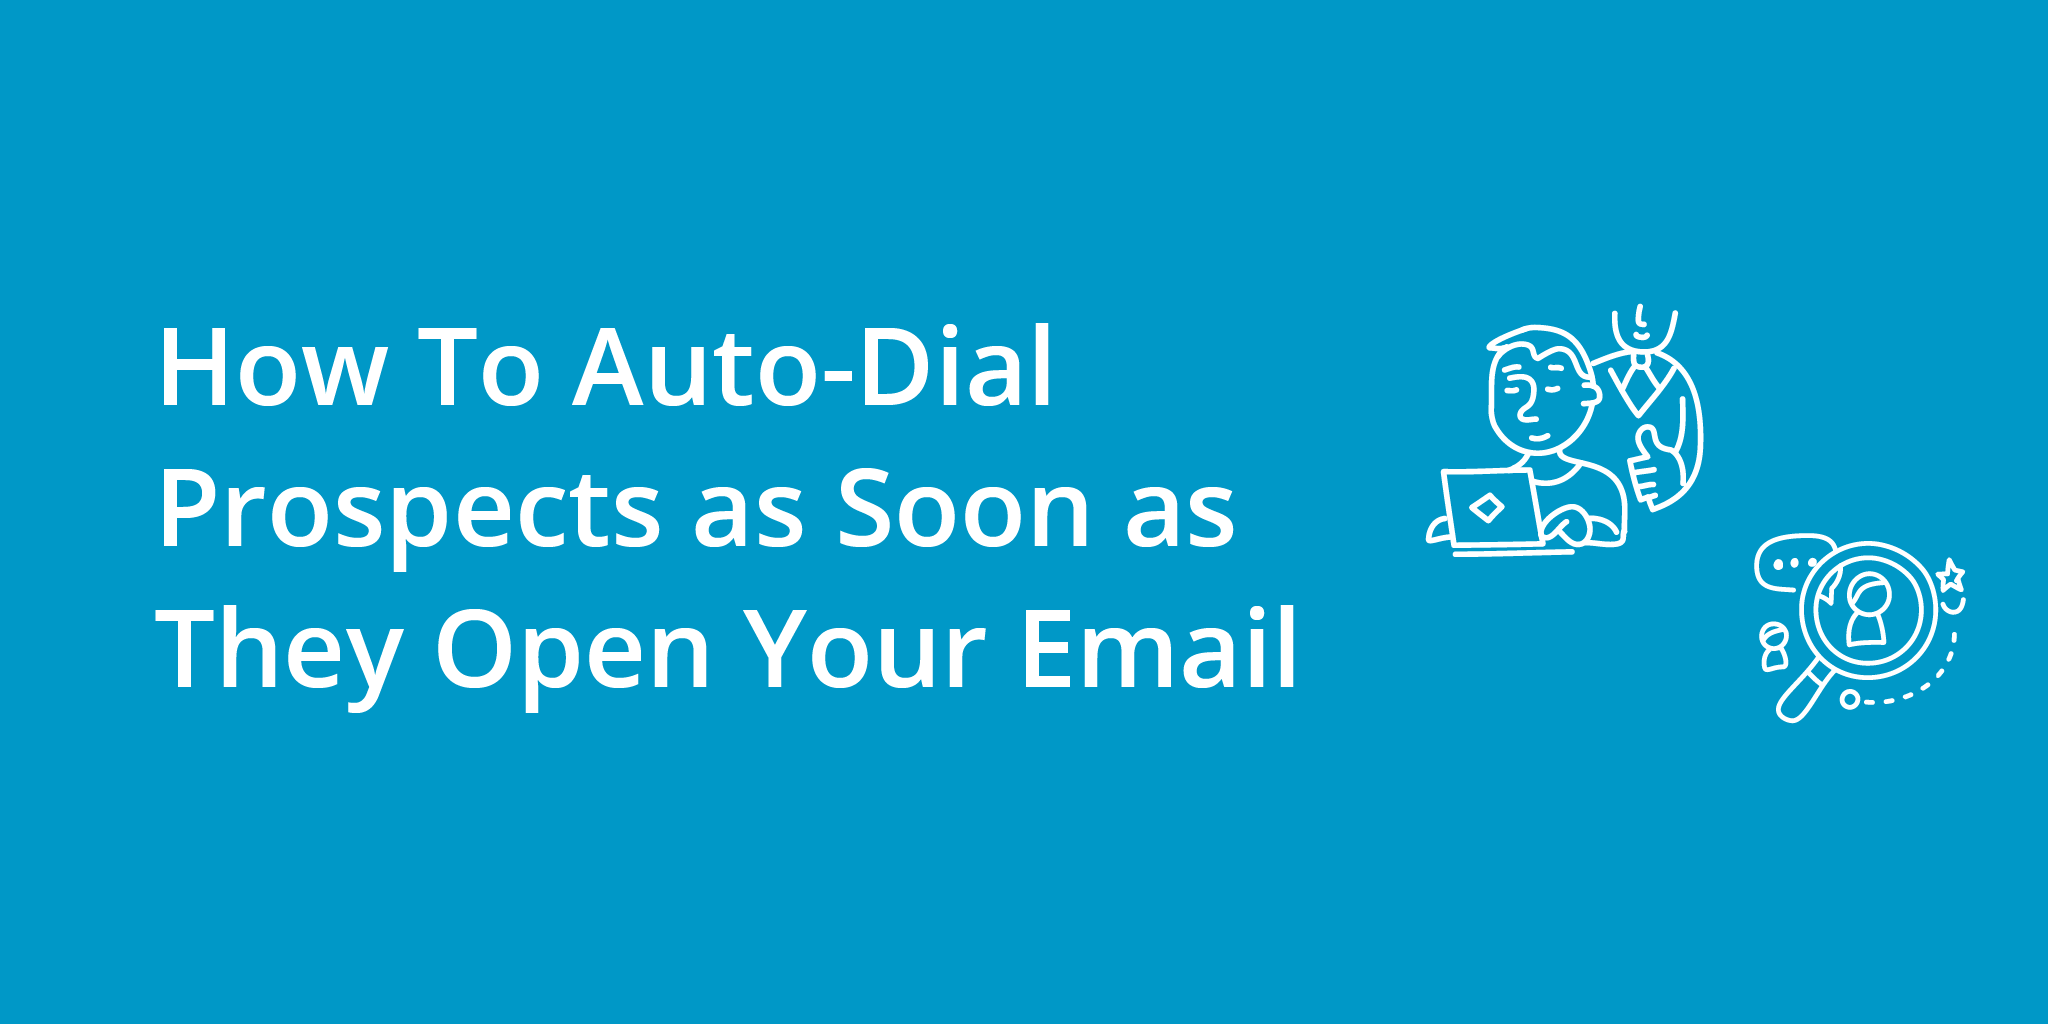 How To Auto-Dial Prospects as Soon as They Open Your Email